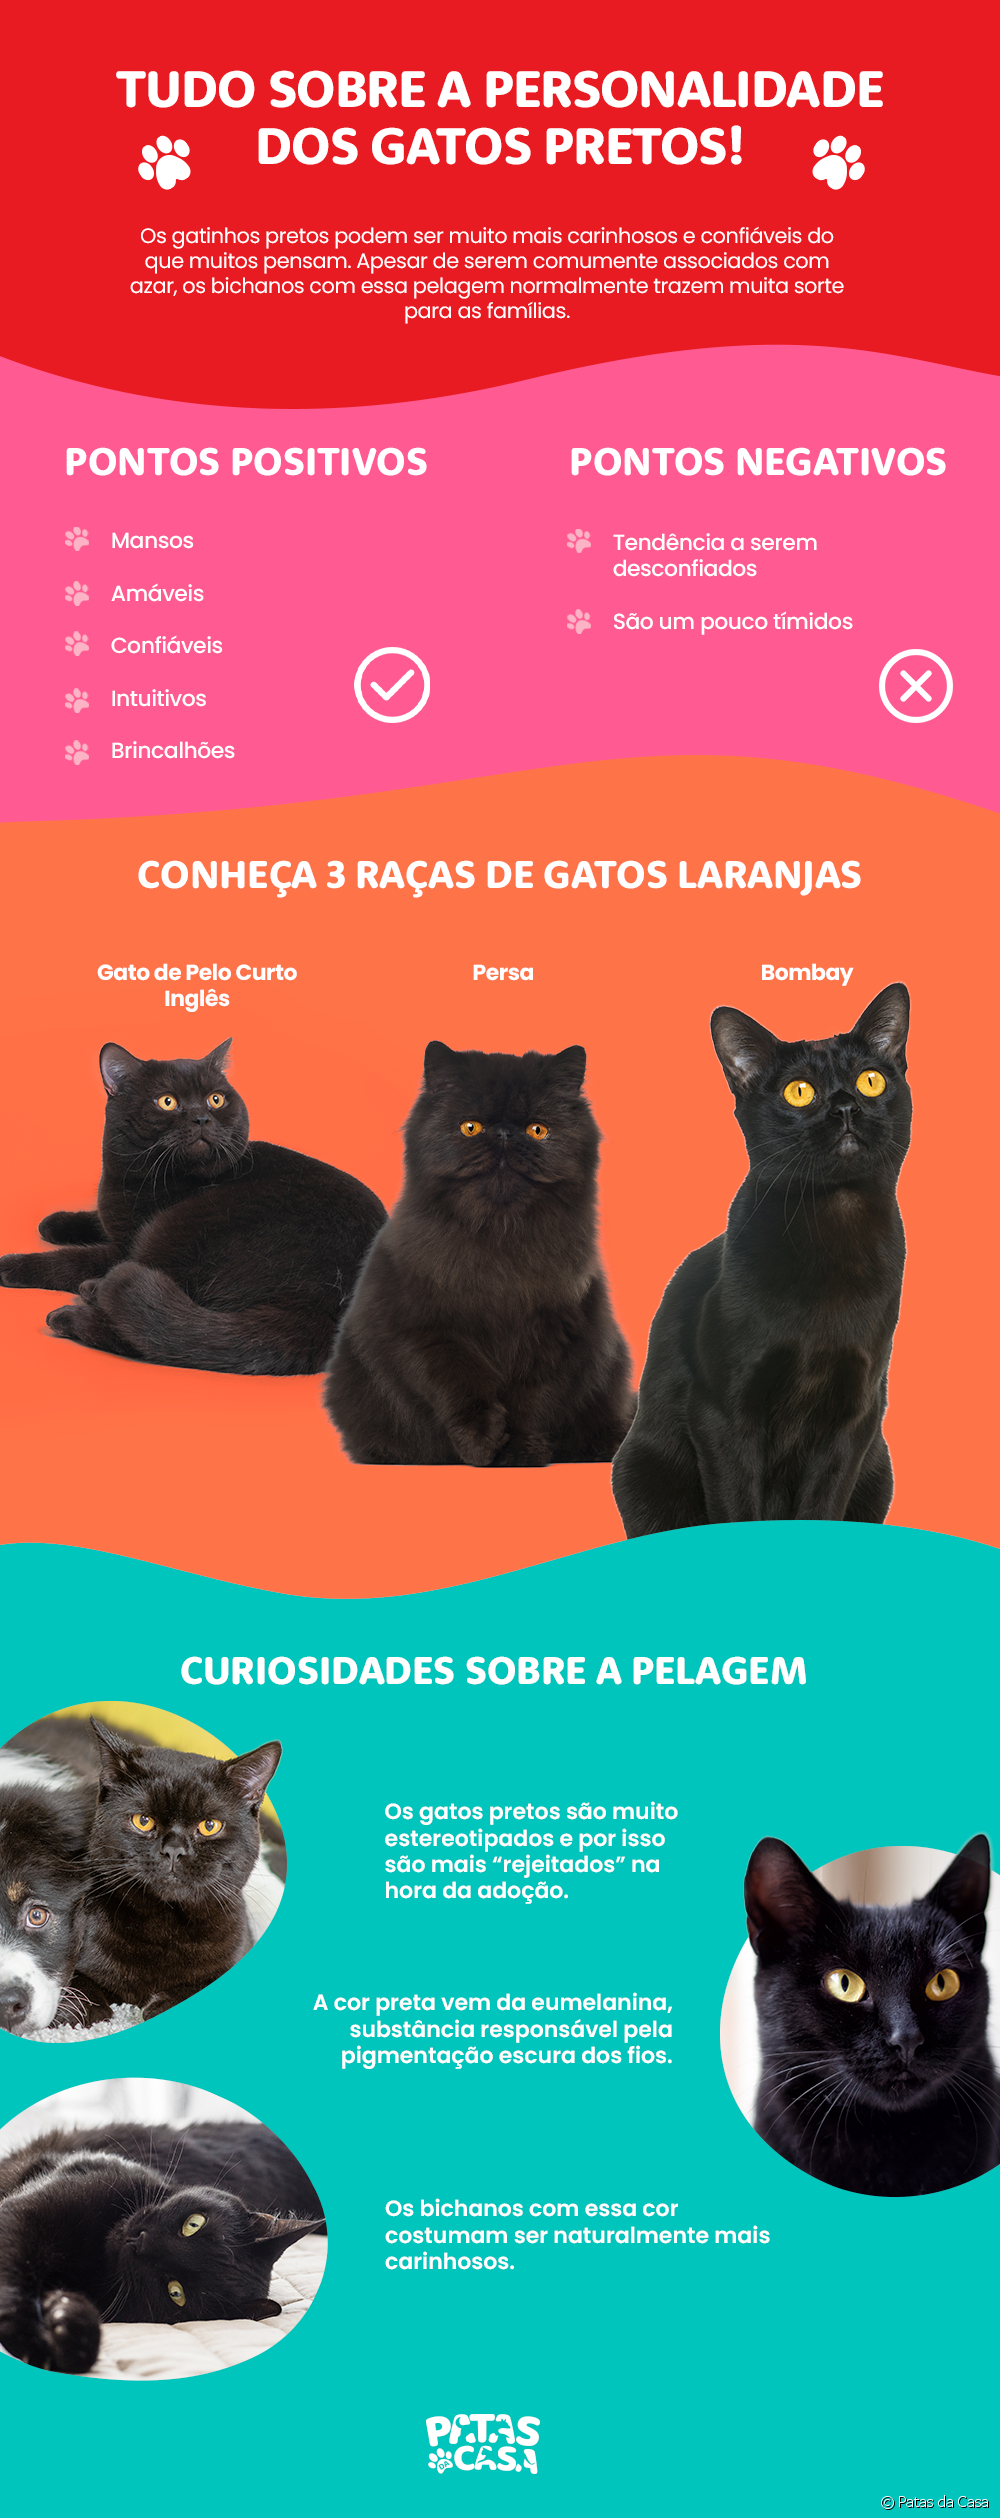  Black cat: see infographic that summarizes everything about the personality of this pet